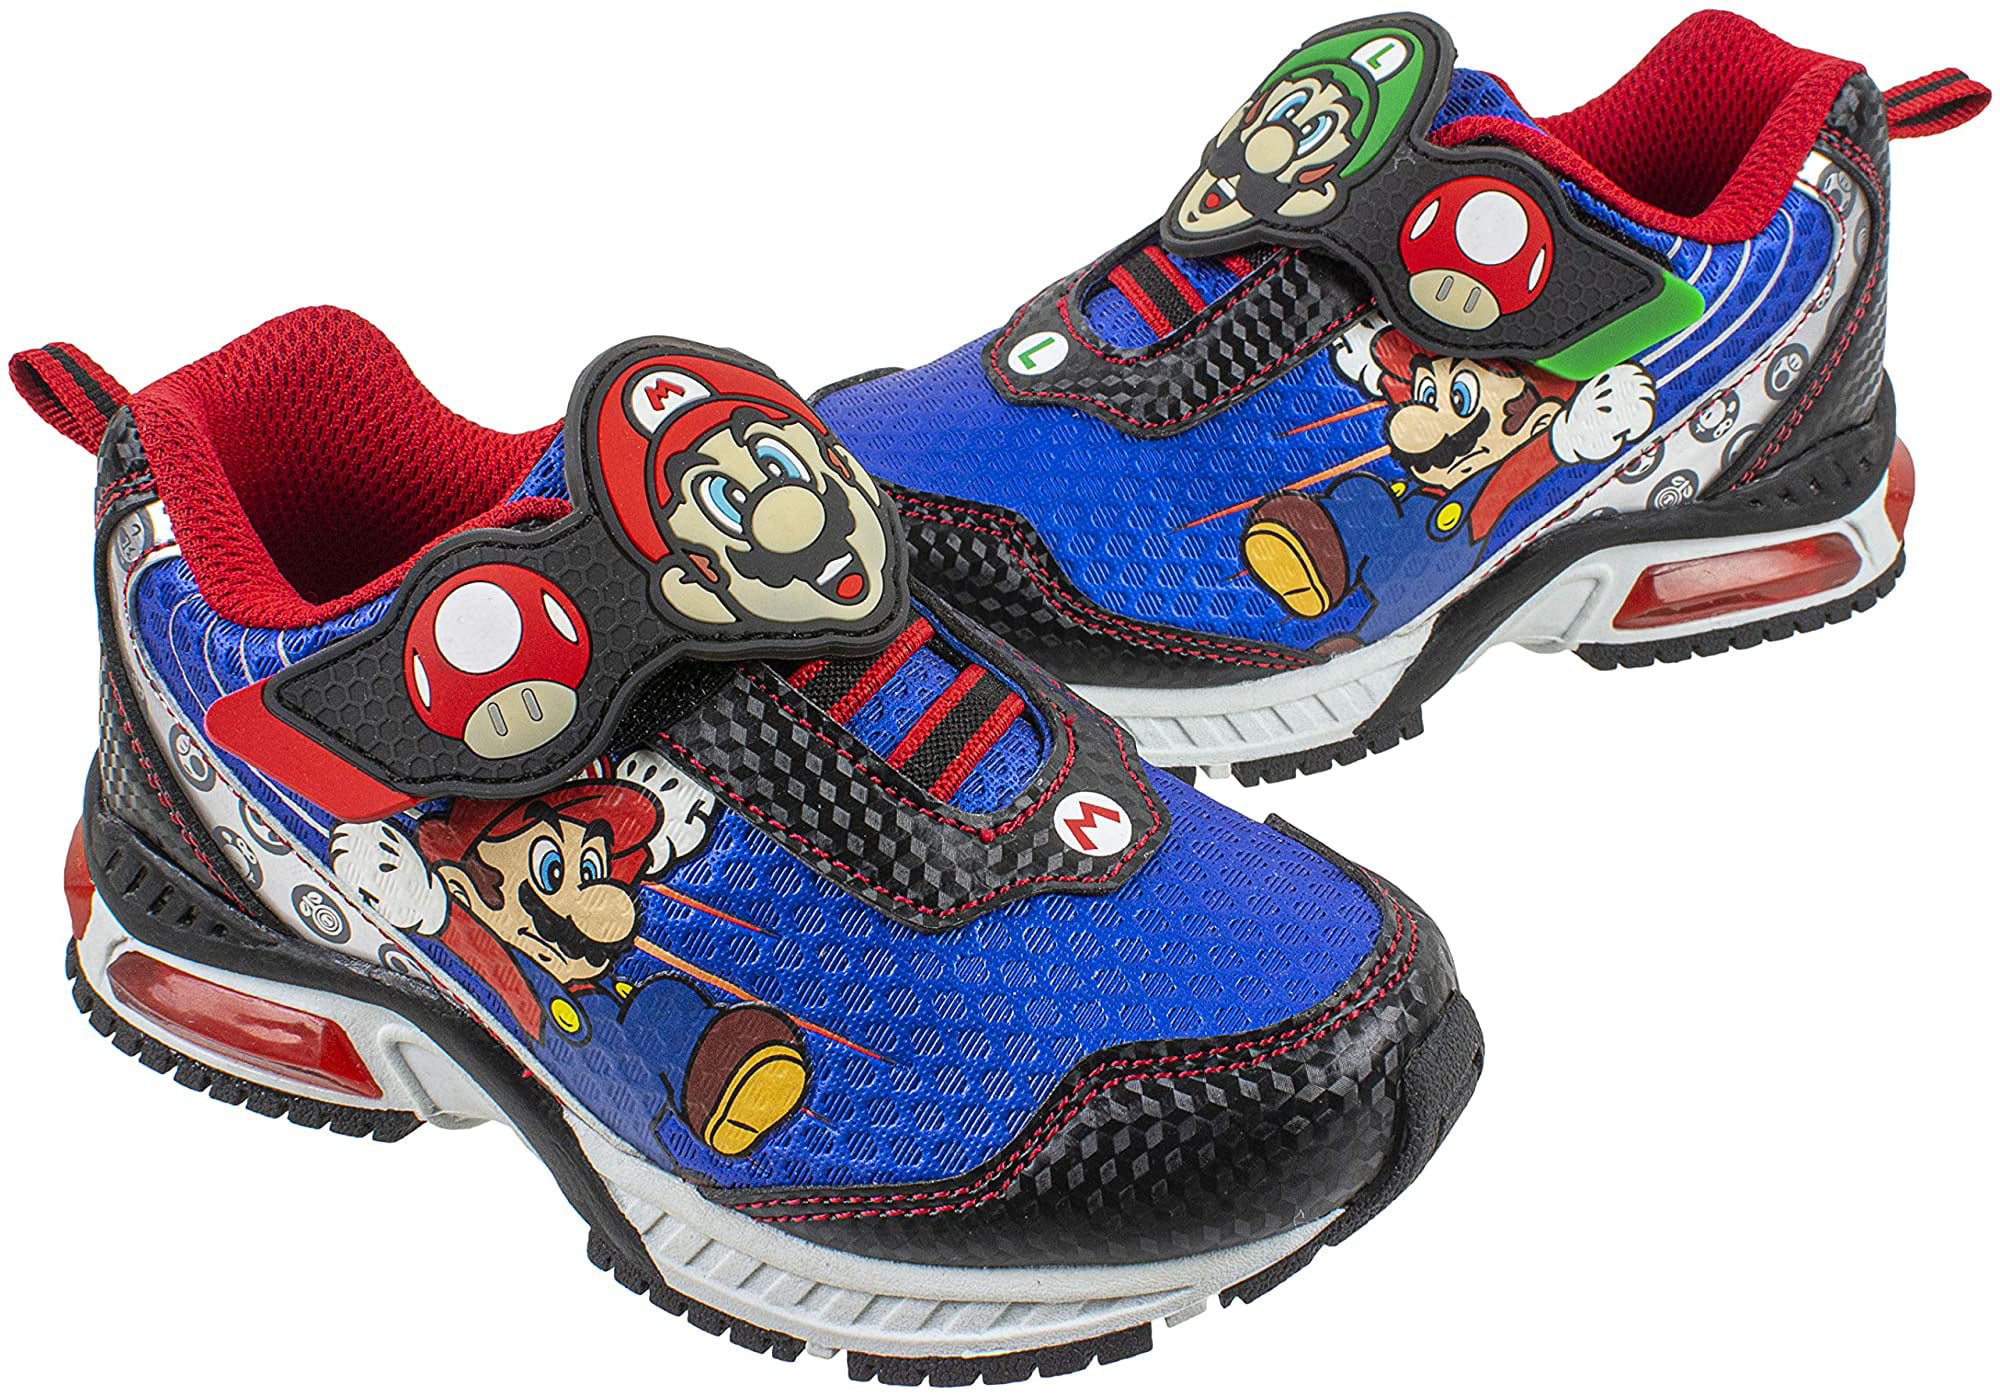 Mix Match Runner Trainer Light Up Sneaker Super Mario Brothers Mario and Luigi Kids Tennis Shoe Kids Size 11 to 3 